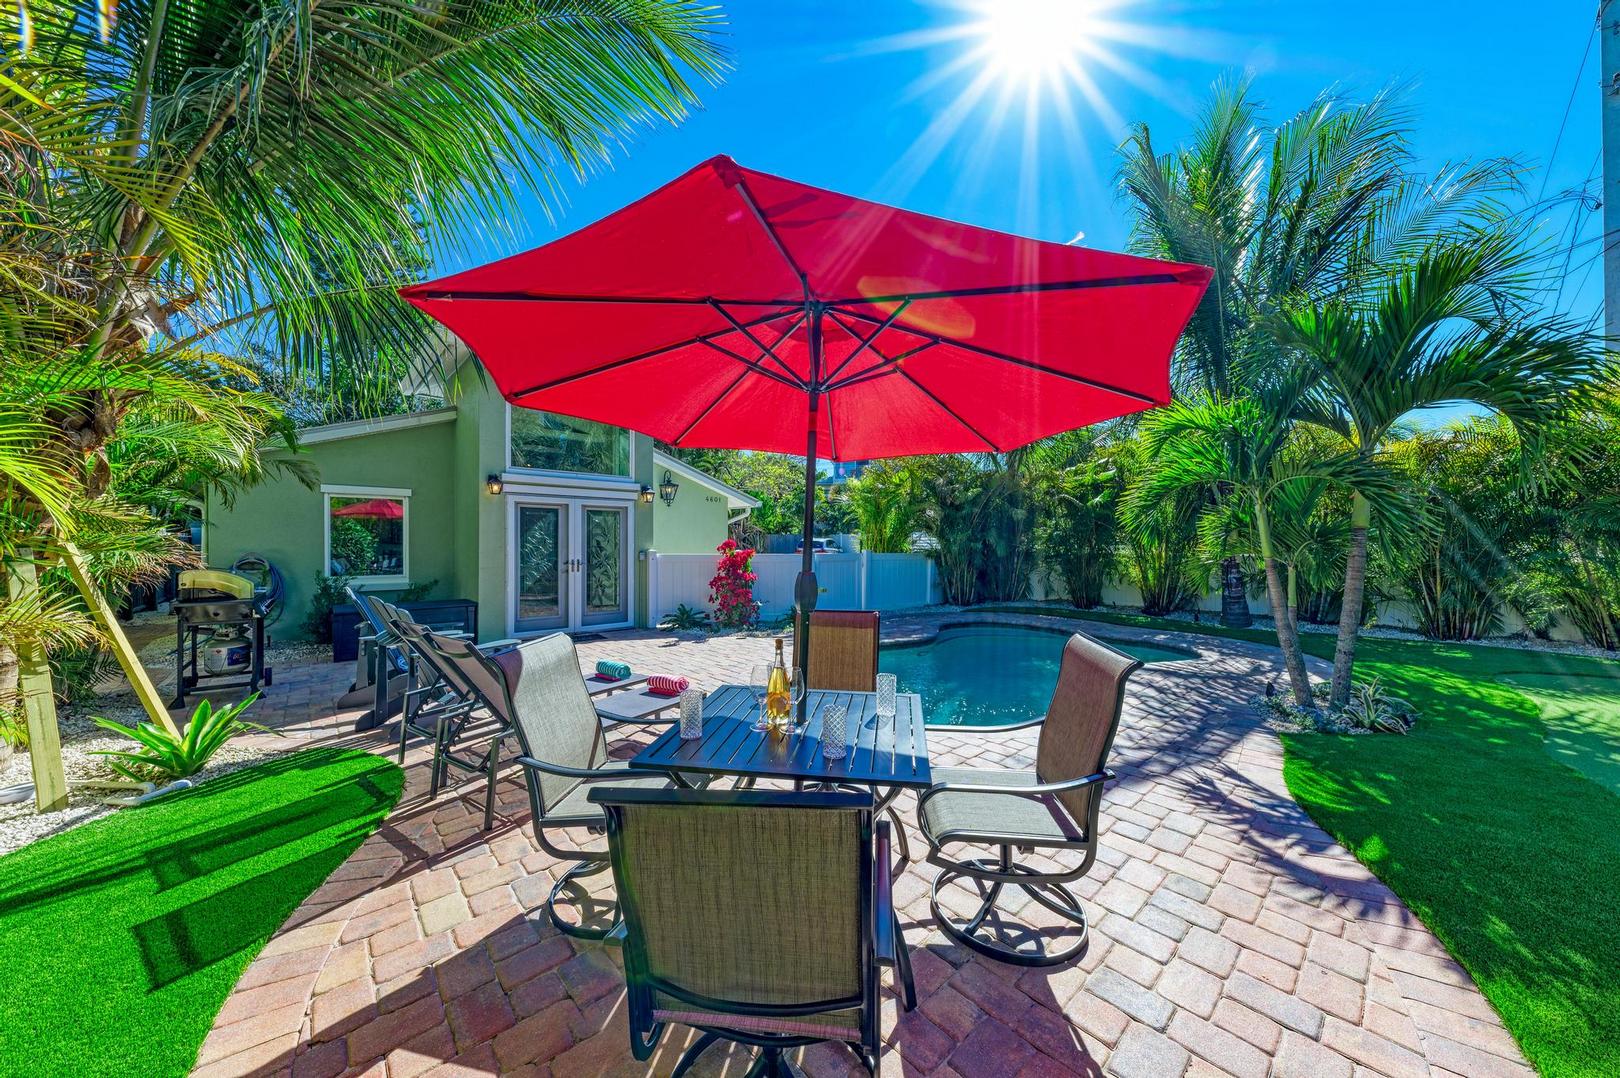 Outdoor dining table with red umbrella beside the pool at Turtle Tyme, a vacation rental by Anna Maria Life Vacation Rentals